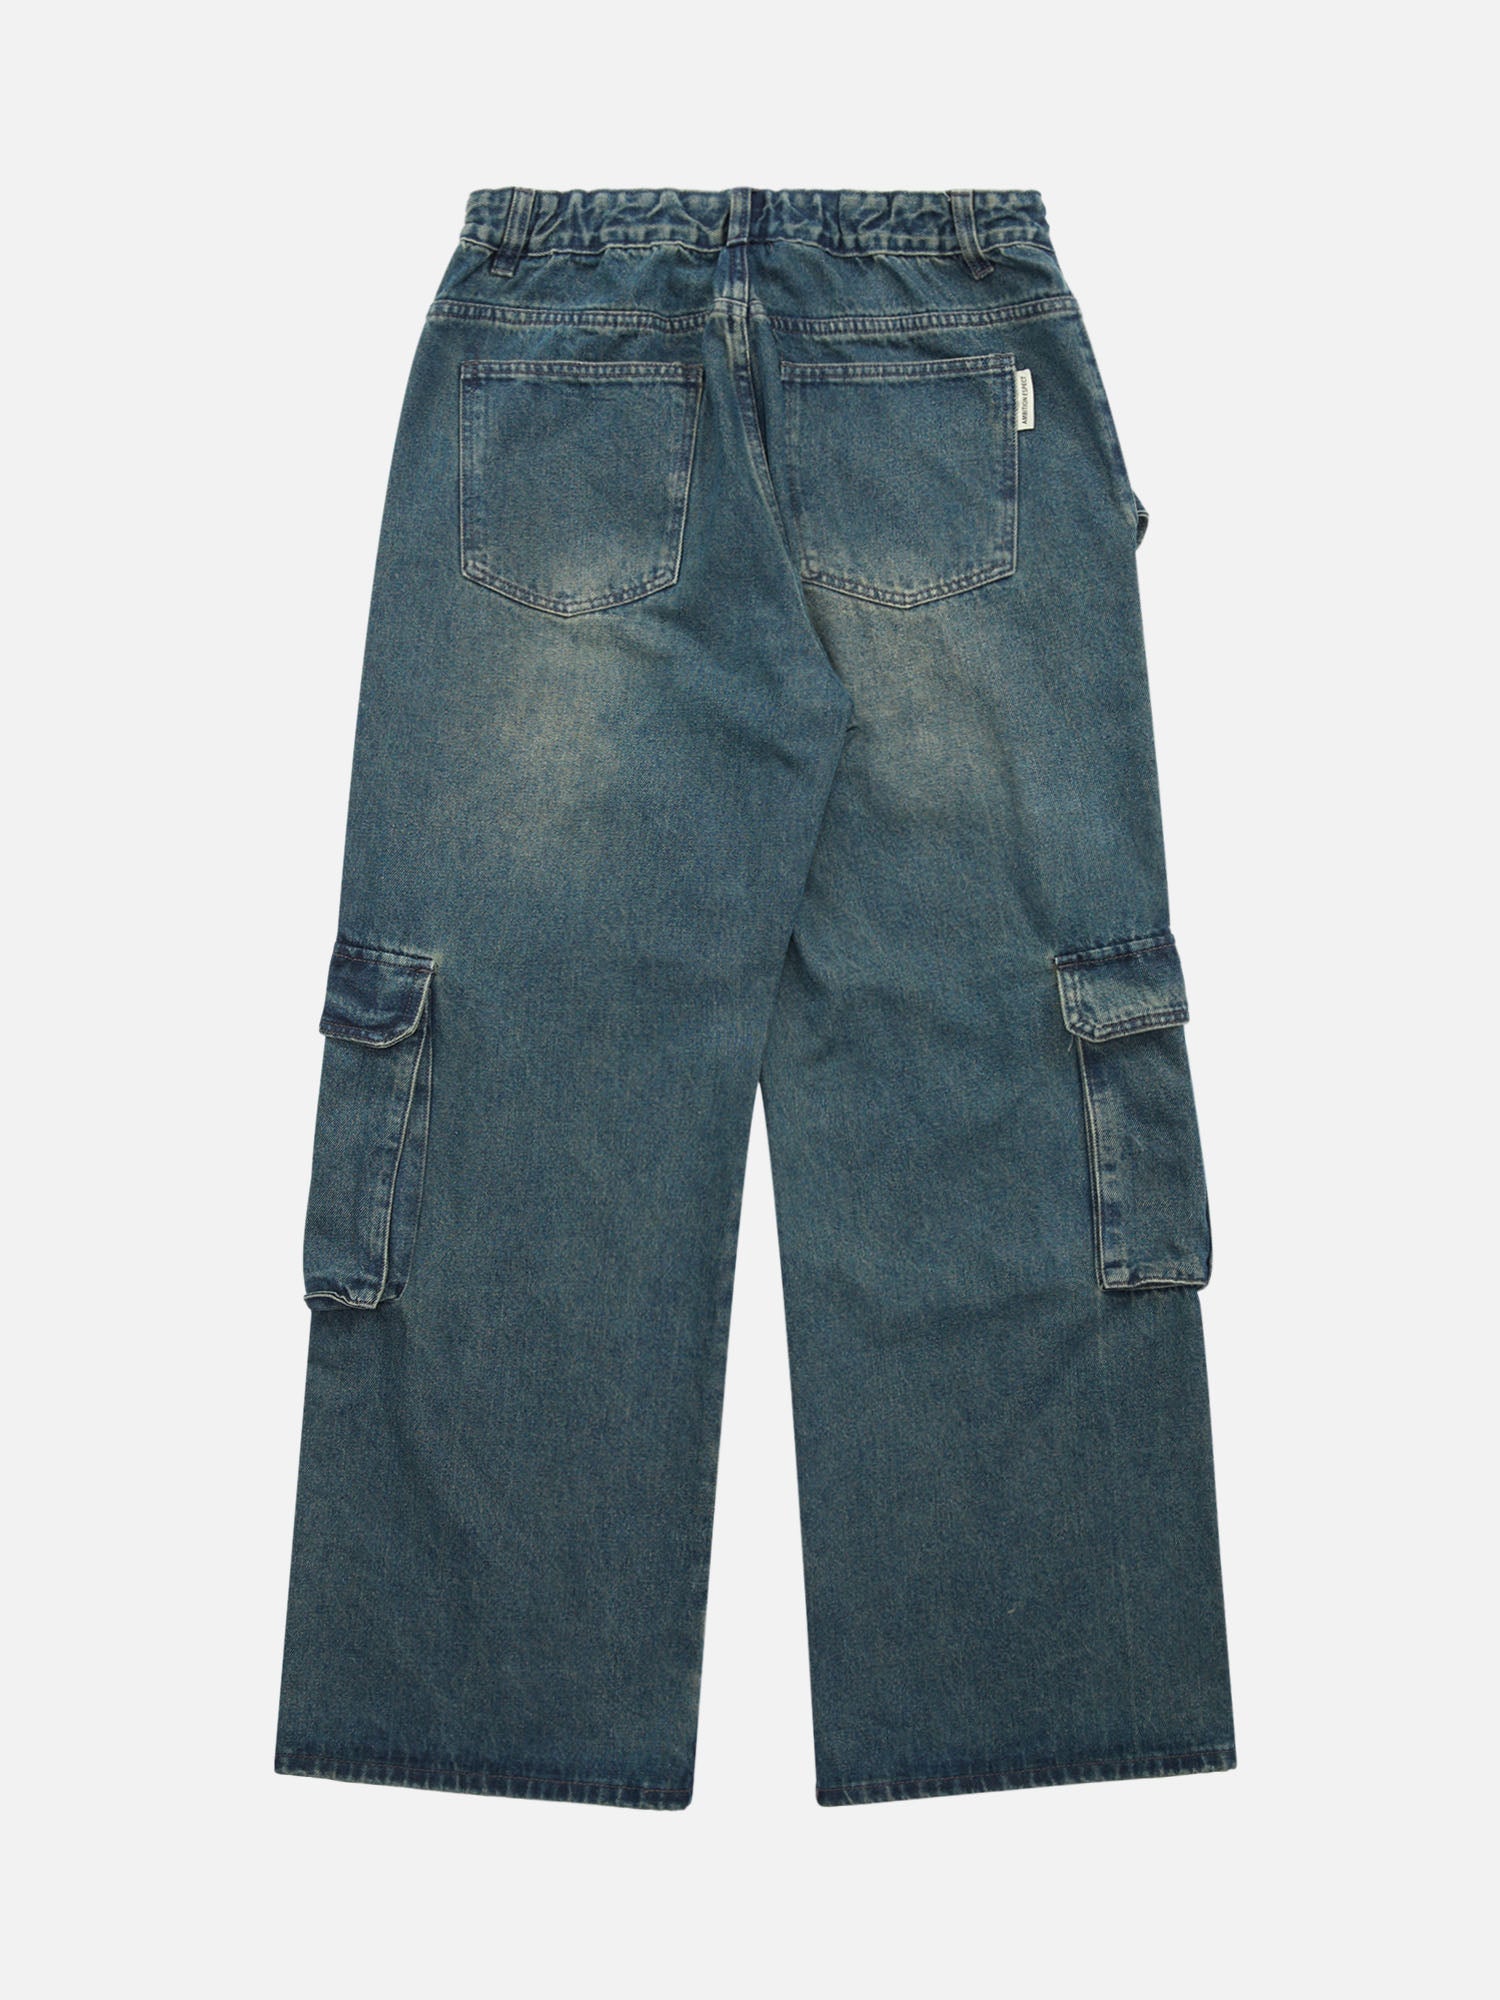 Thesupermade High Street Heavy Duty Design Multi-pocket Jeans